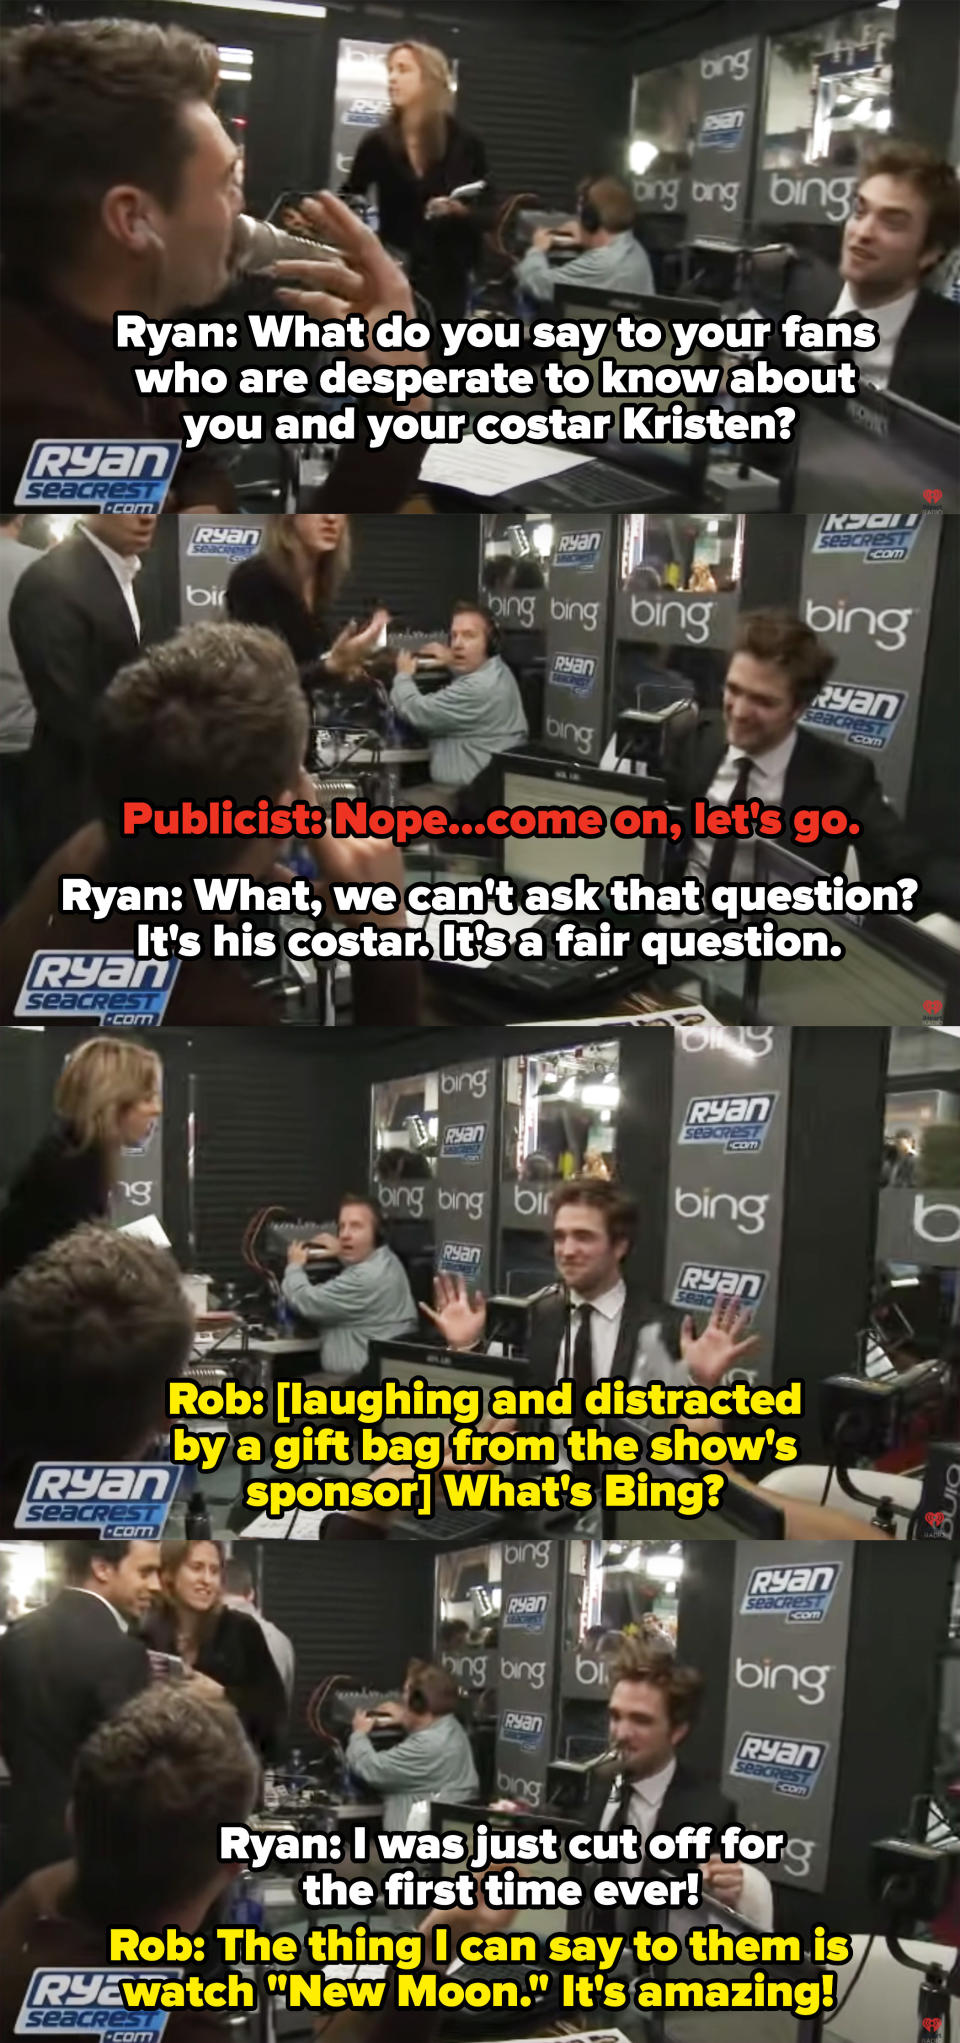 Robert Pattinson's publicist telling him to leave an interview with Ryan Seacrest.